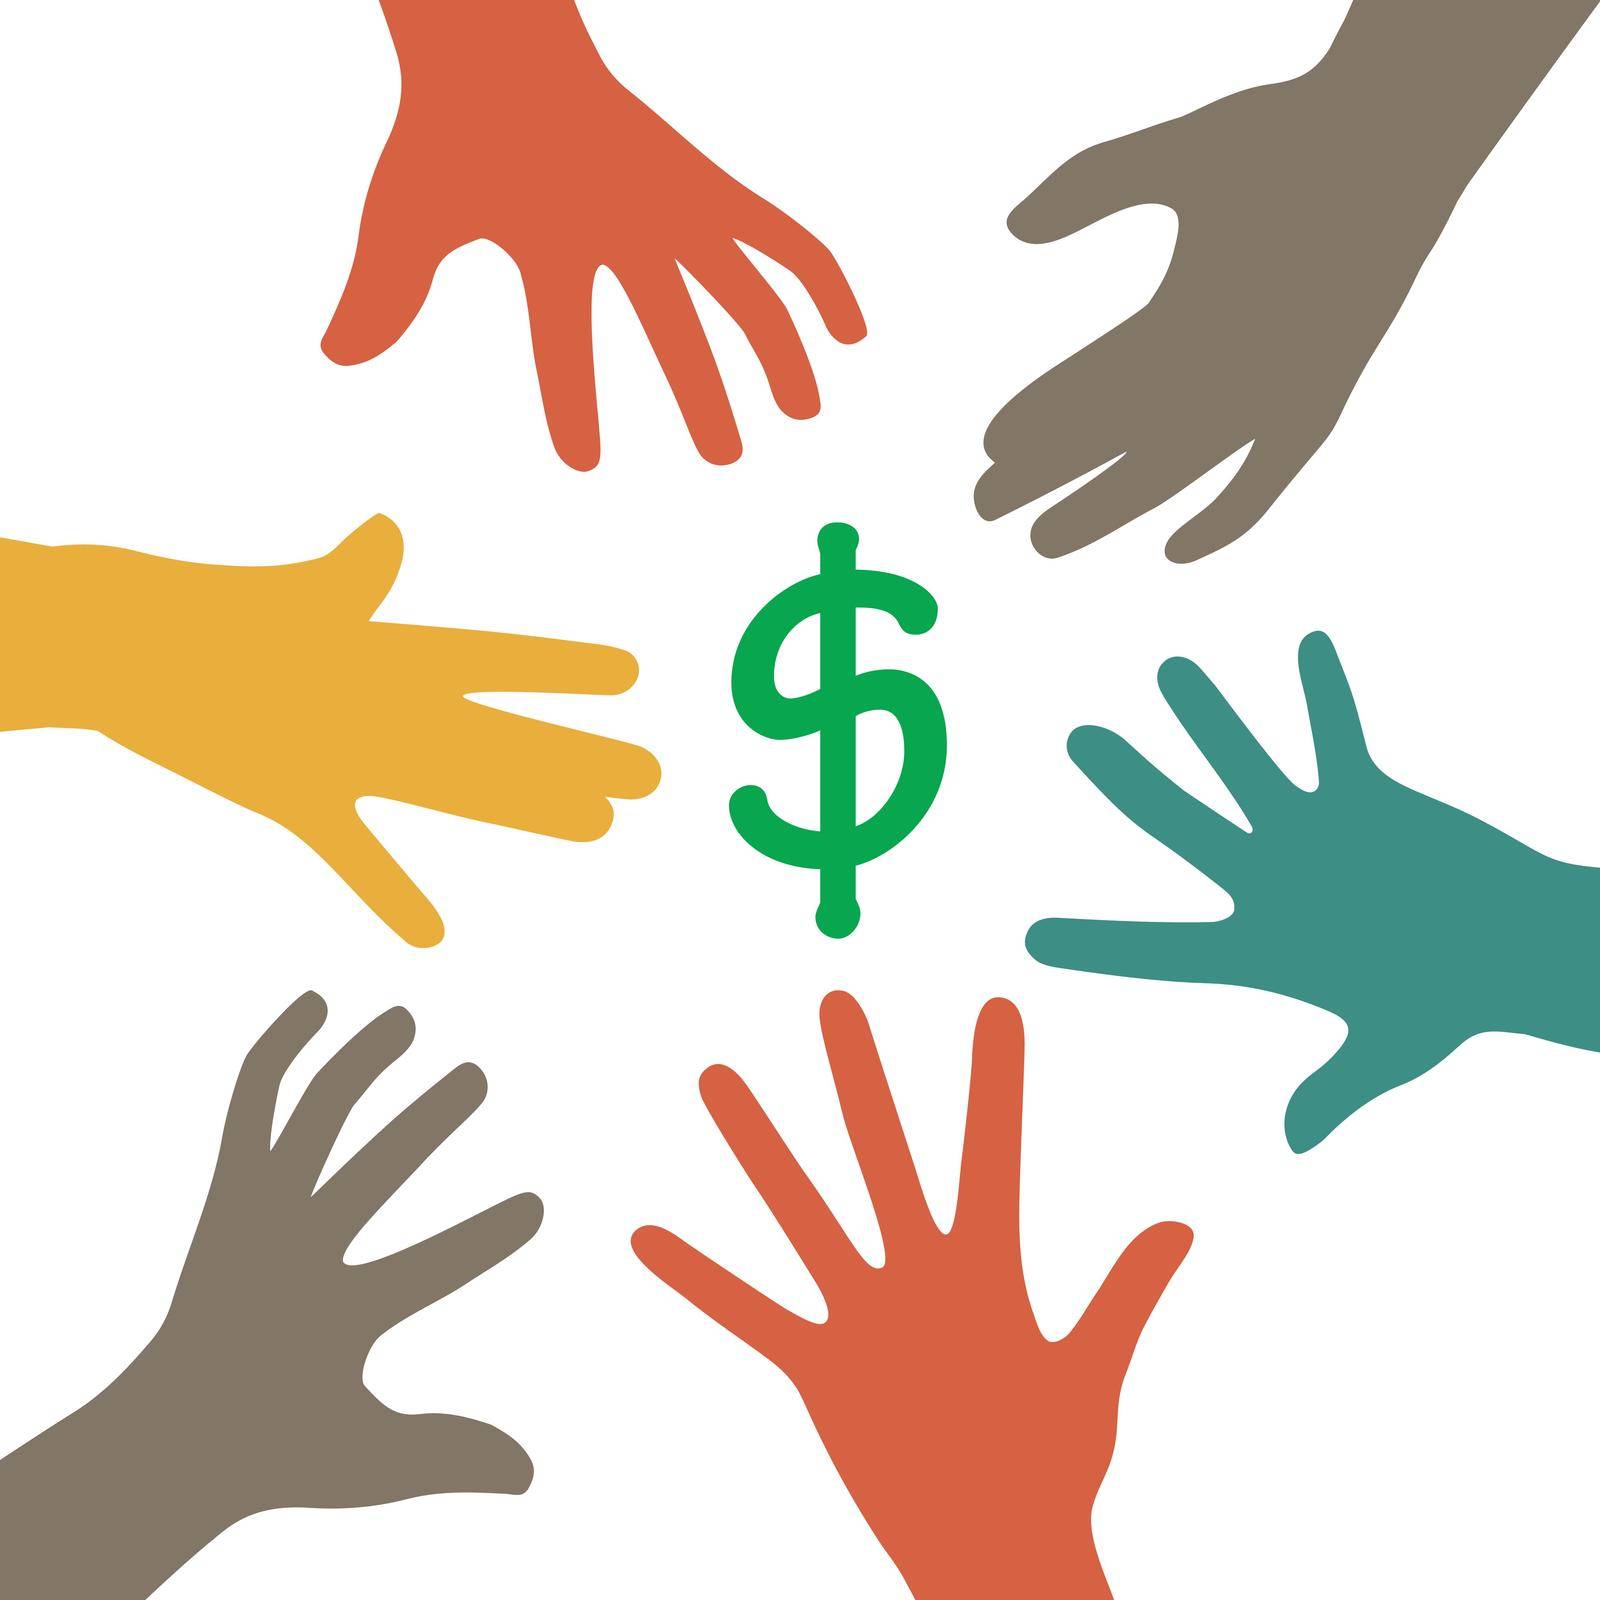 hands reaching out to grab dollars, get money. vectro illustration by eveleen